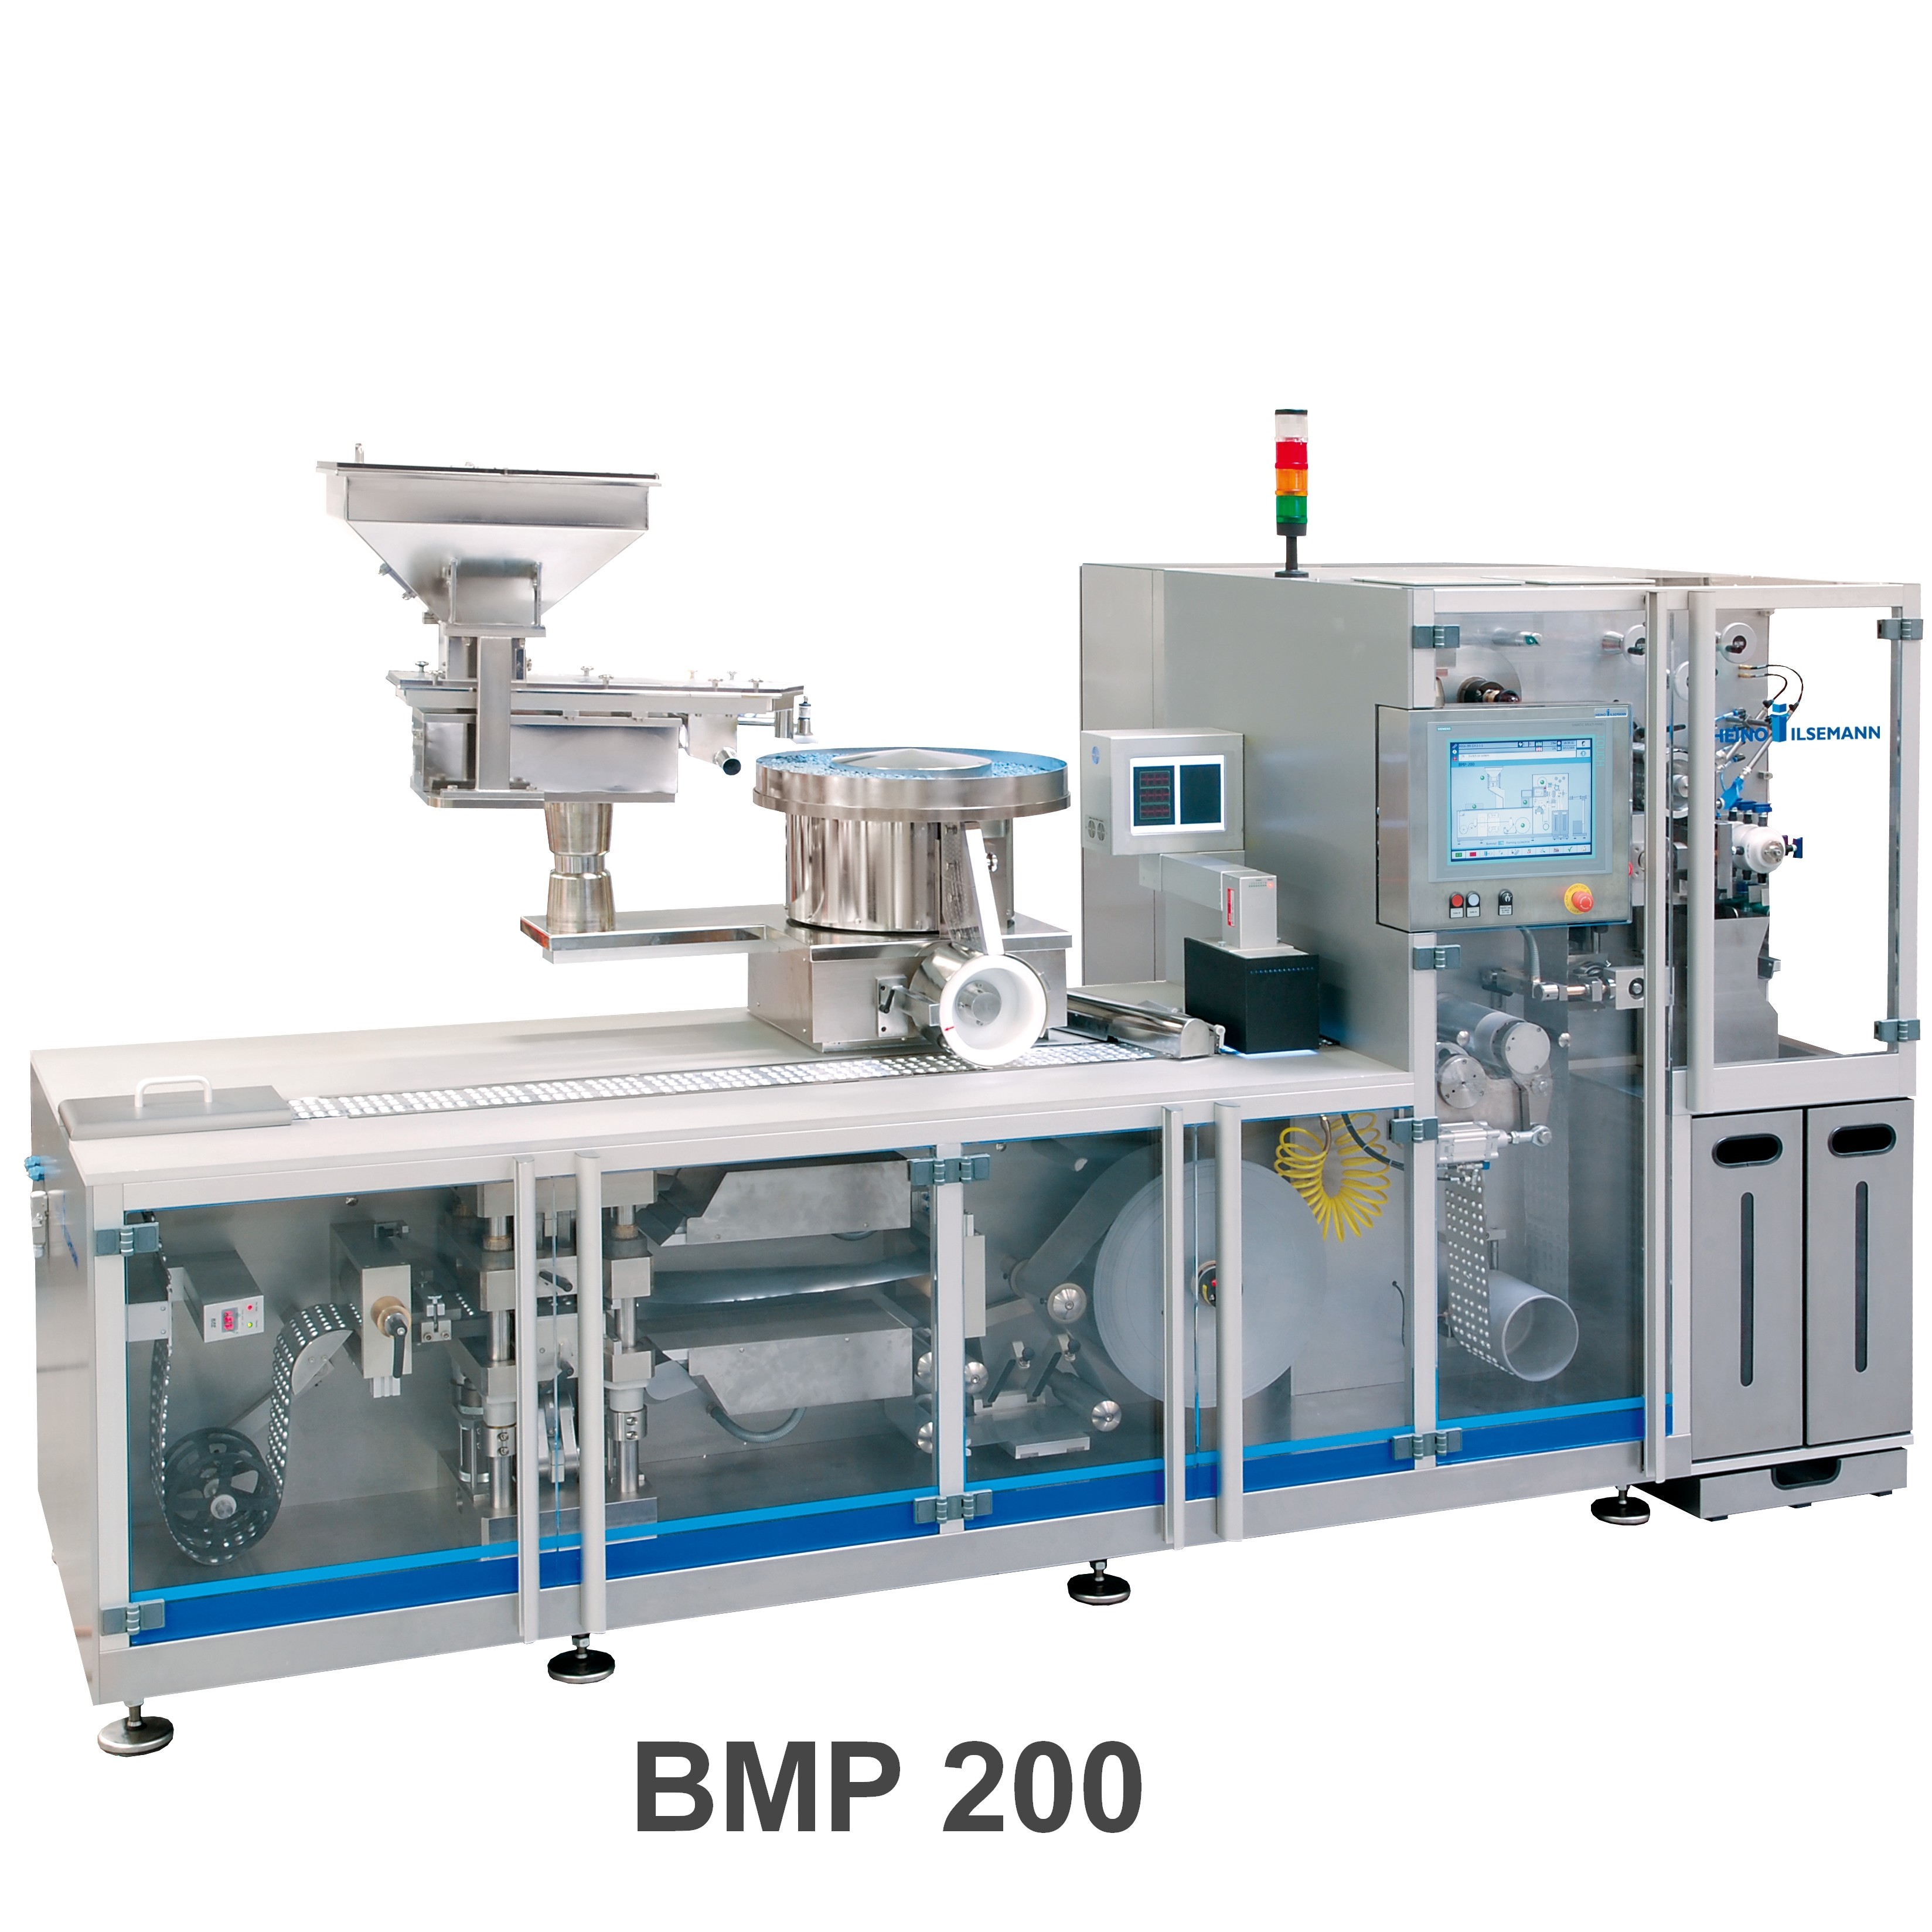 Blistermachine type BMP 200